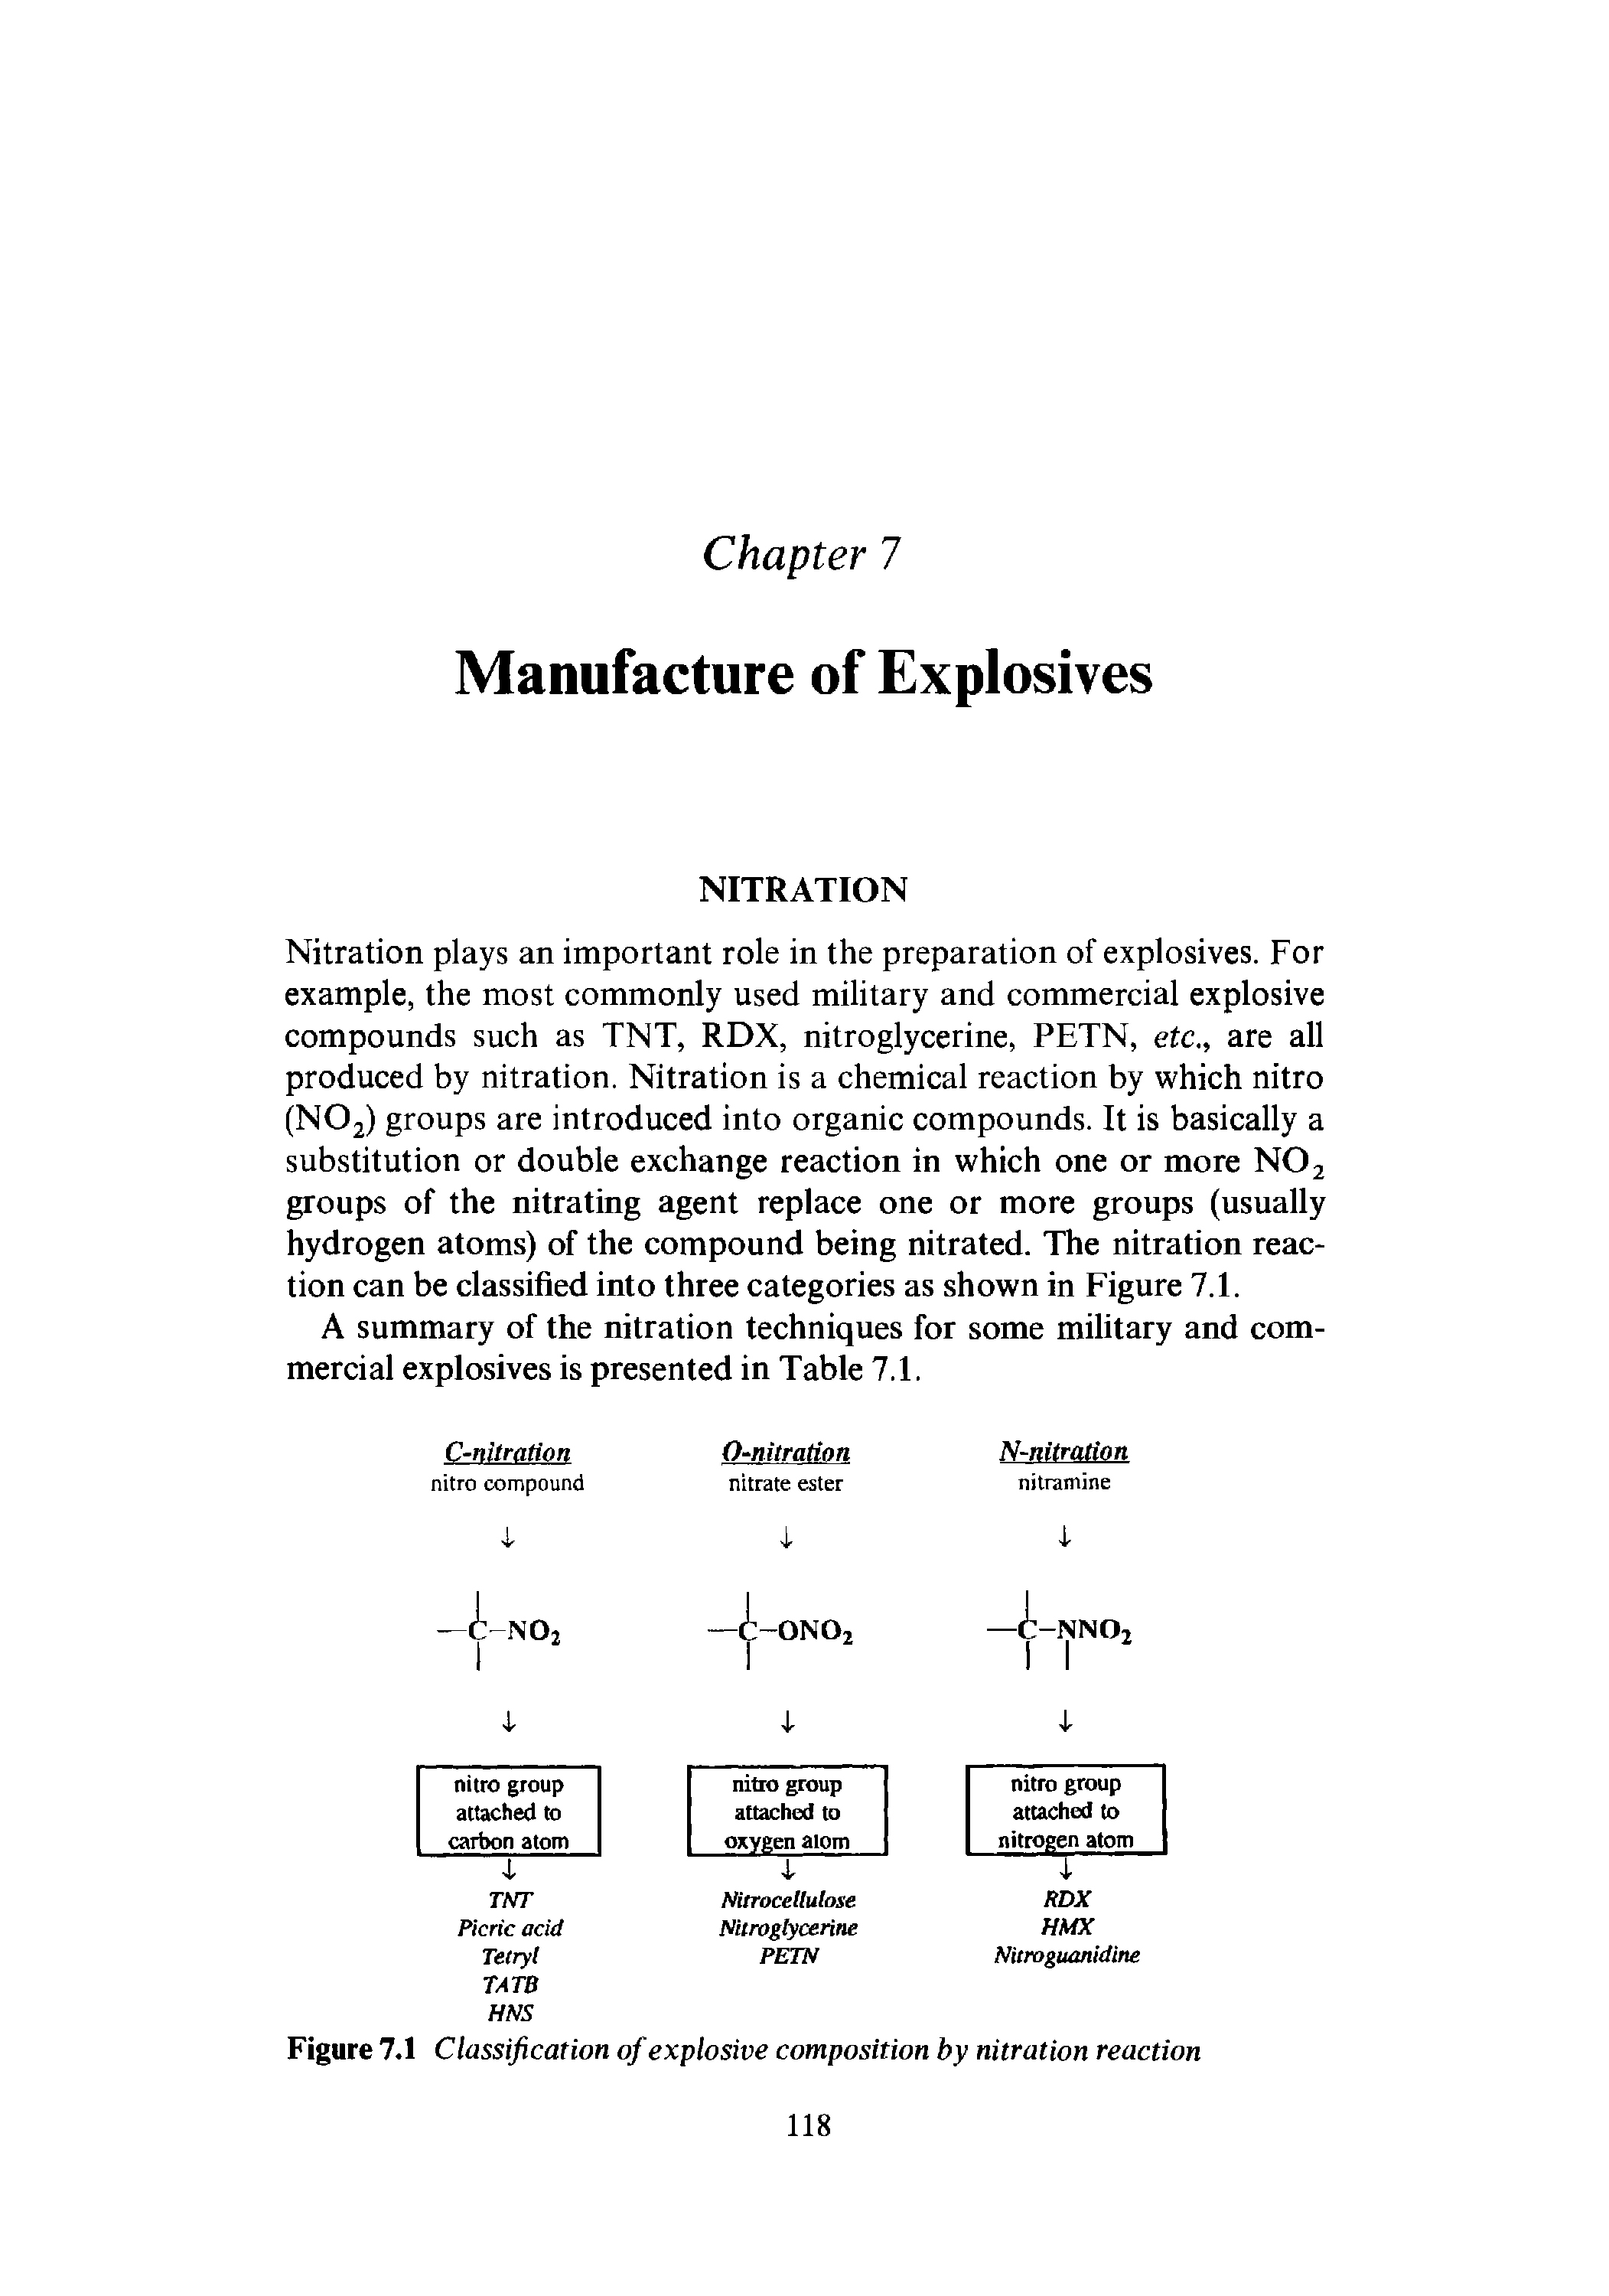 Figure 7.1 Classification of explosive composition by nitration reaction...